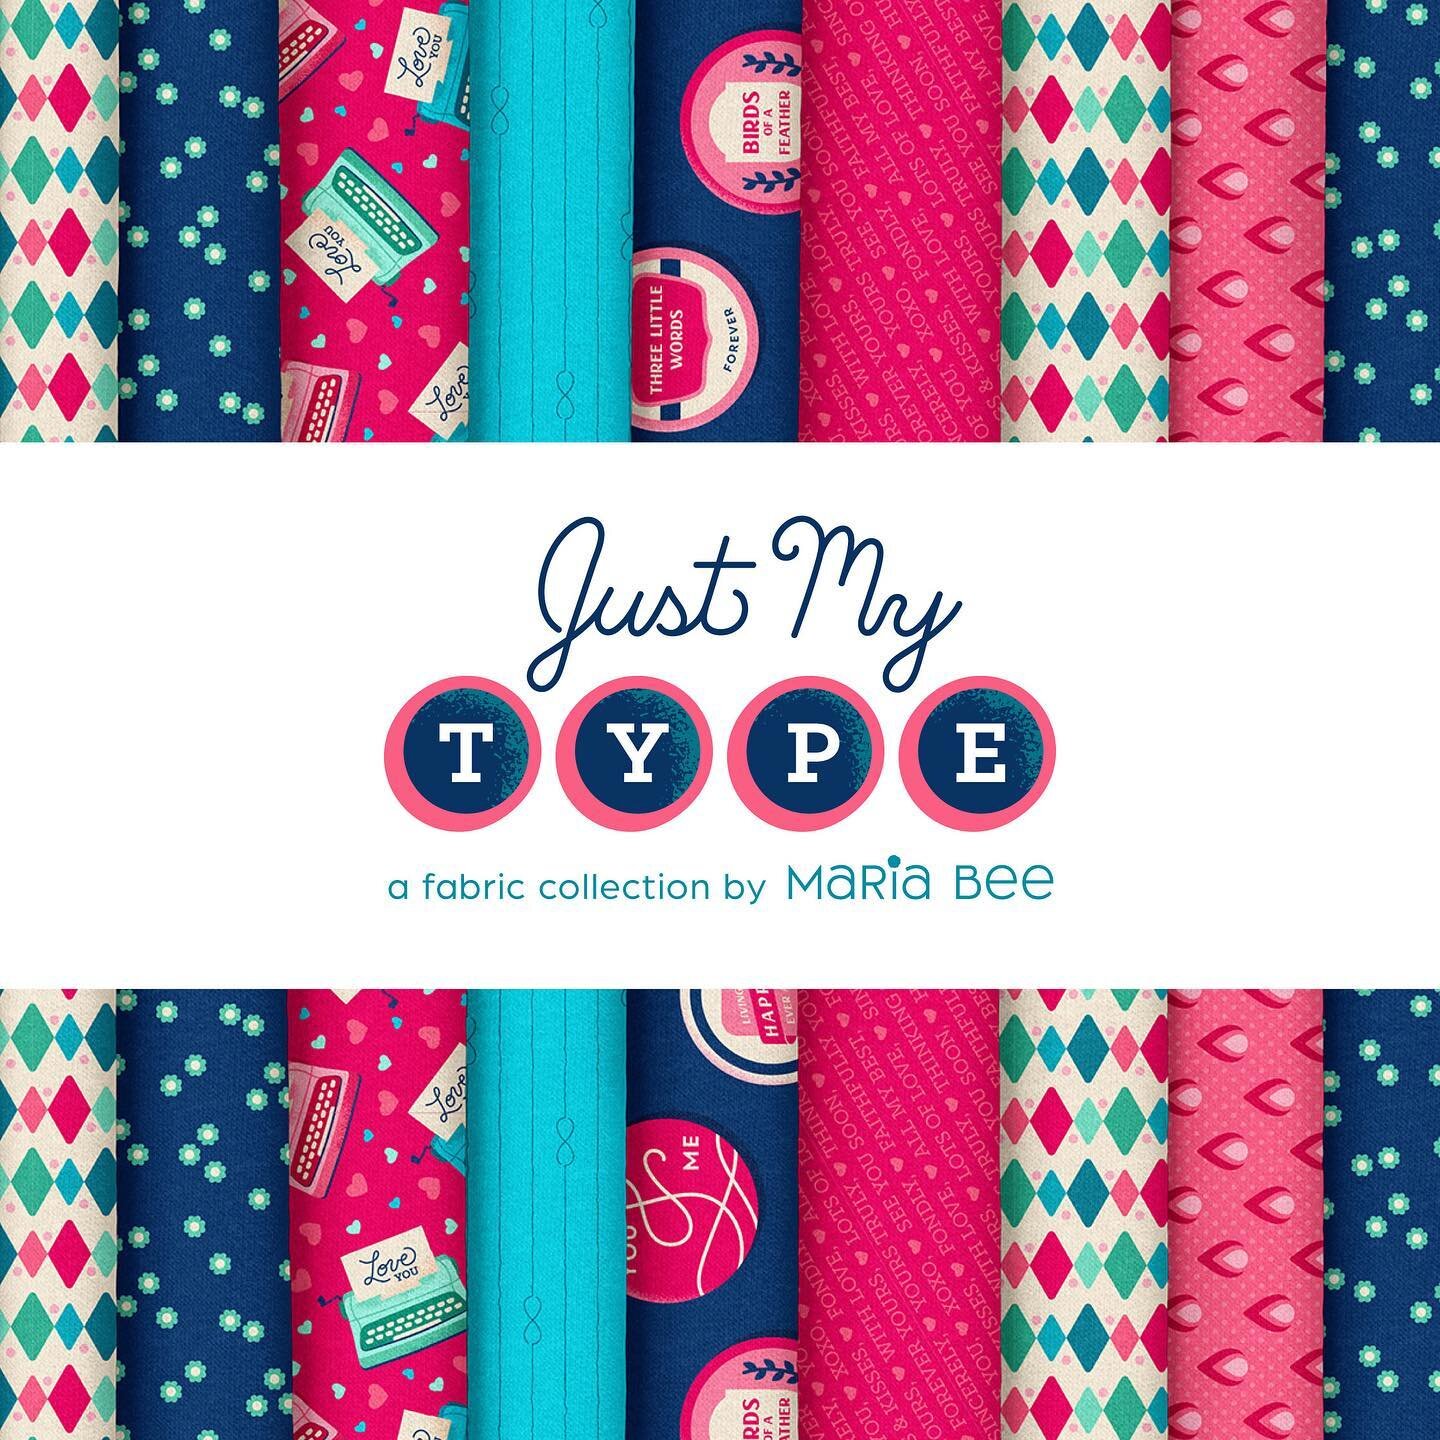 It&rsquo;s almost Valentine&rsquo;s Day, which means it&rsquo;s the perfect time to share my new pattern collection, Just My Type. It&rsquo;s inspired by love letters, vintage typewriters and their ribbon tin graphics, with a romantic twist. I design